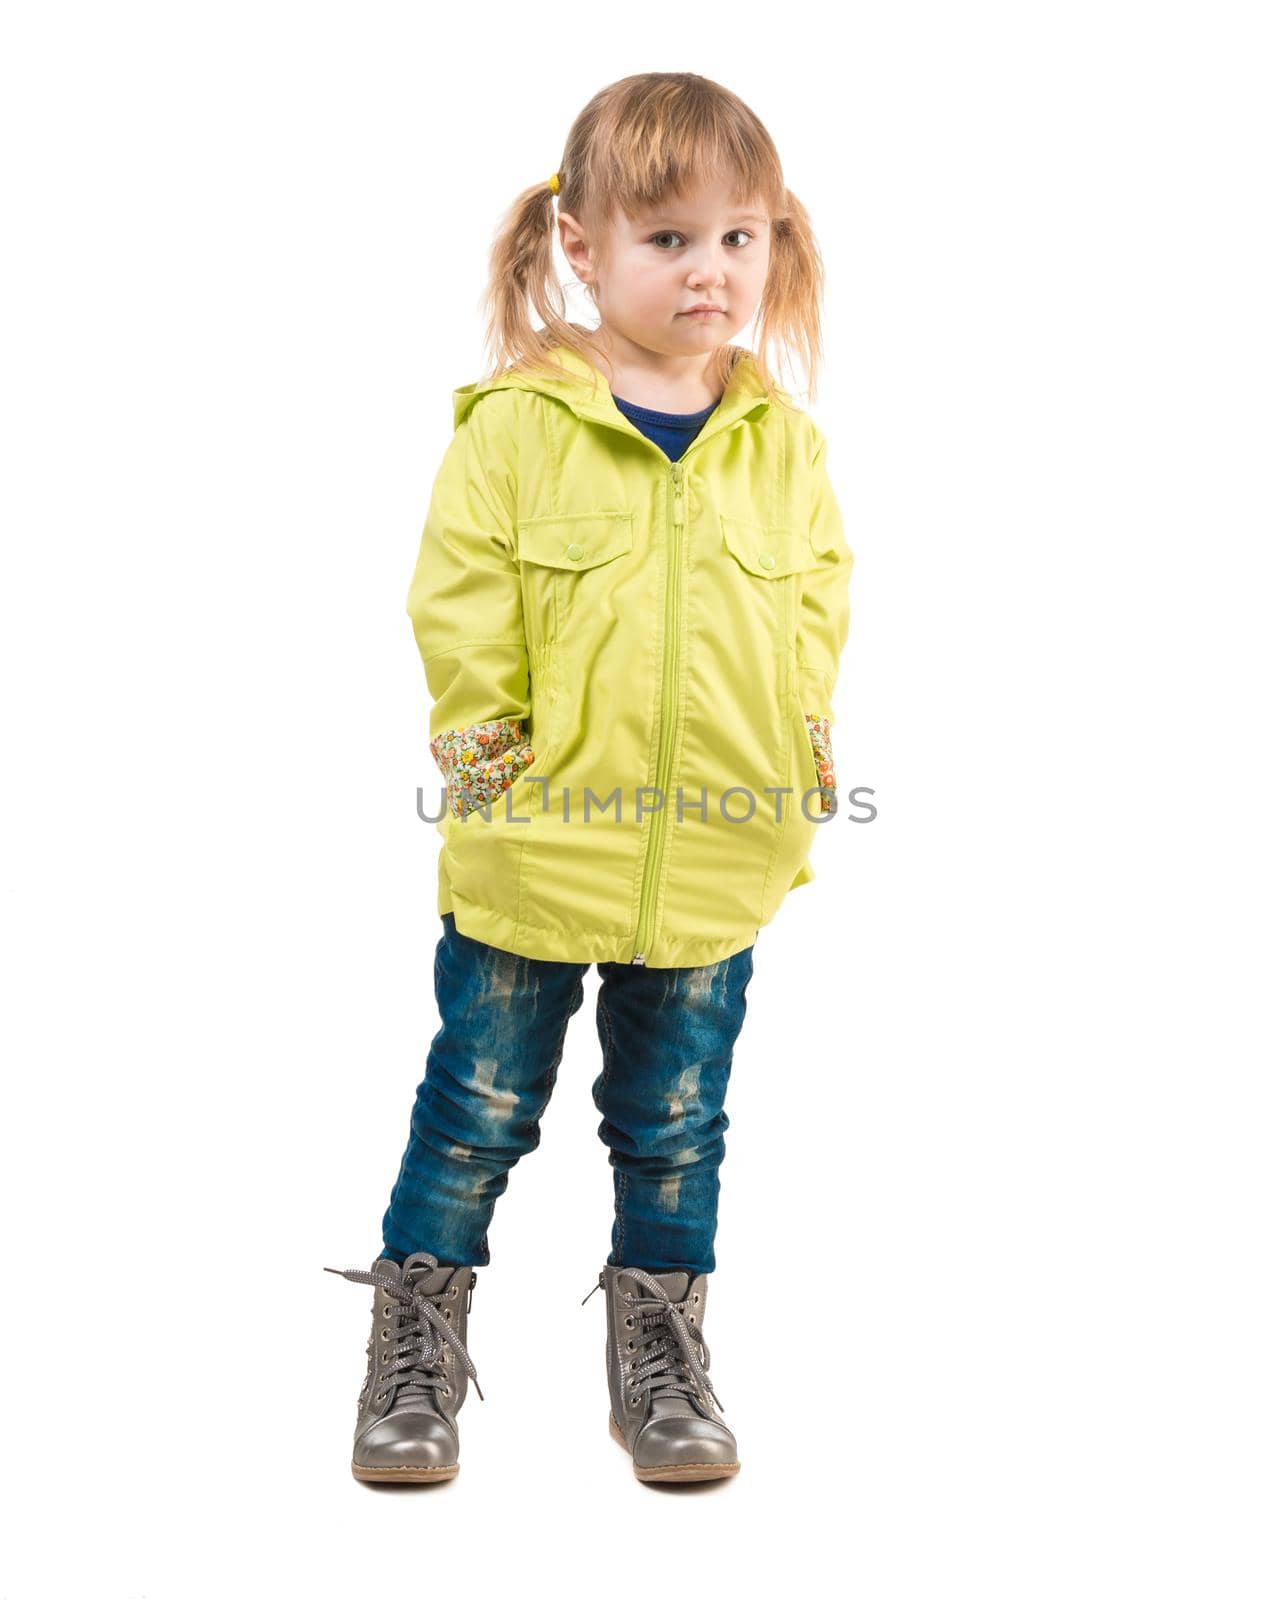 cute little girl in yellow coat and hands in pockets isolated on white background